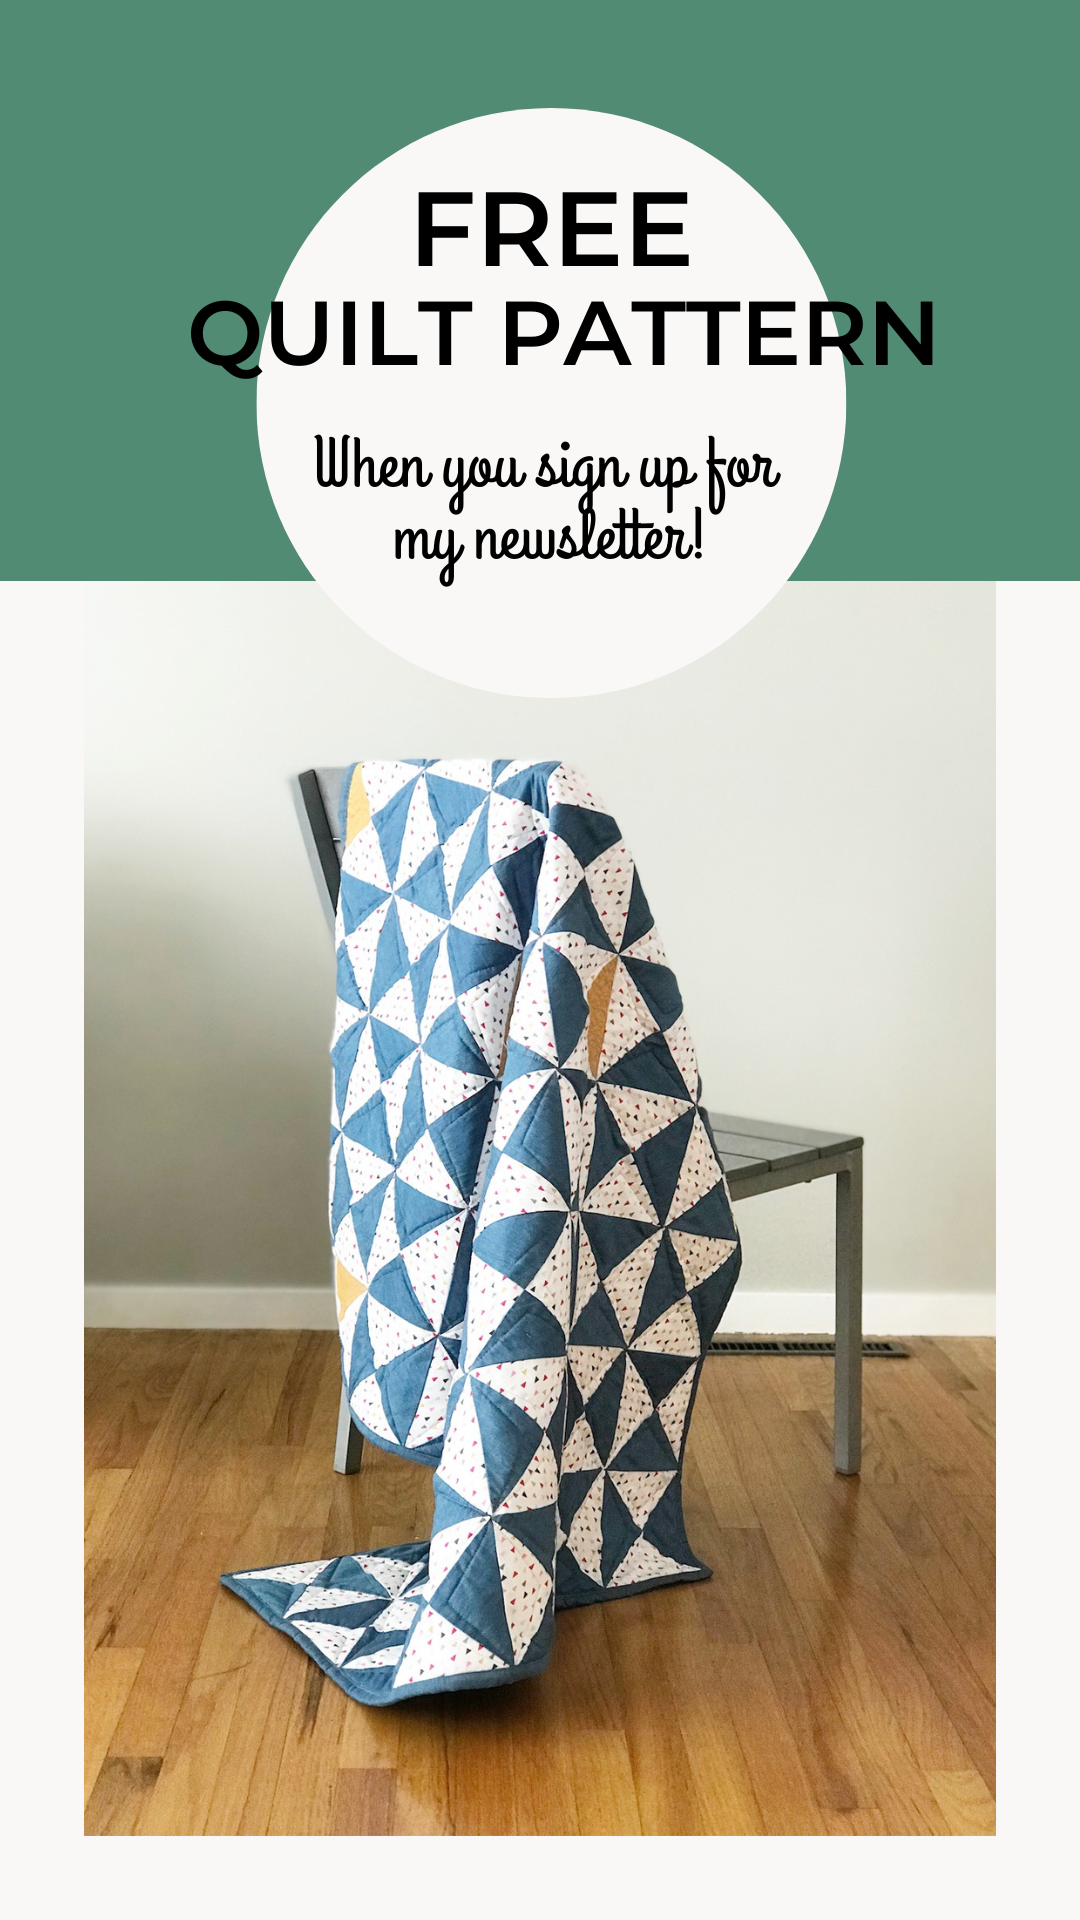 Free Quilt Pattern when you sign up for my email list! You will love making this hourglass block quilt.